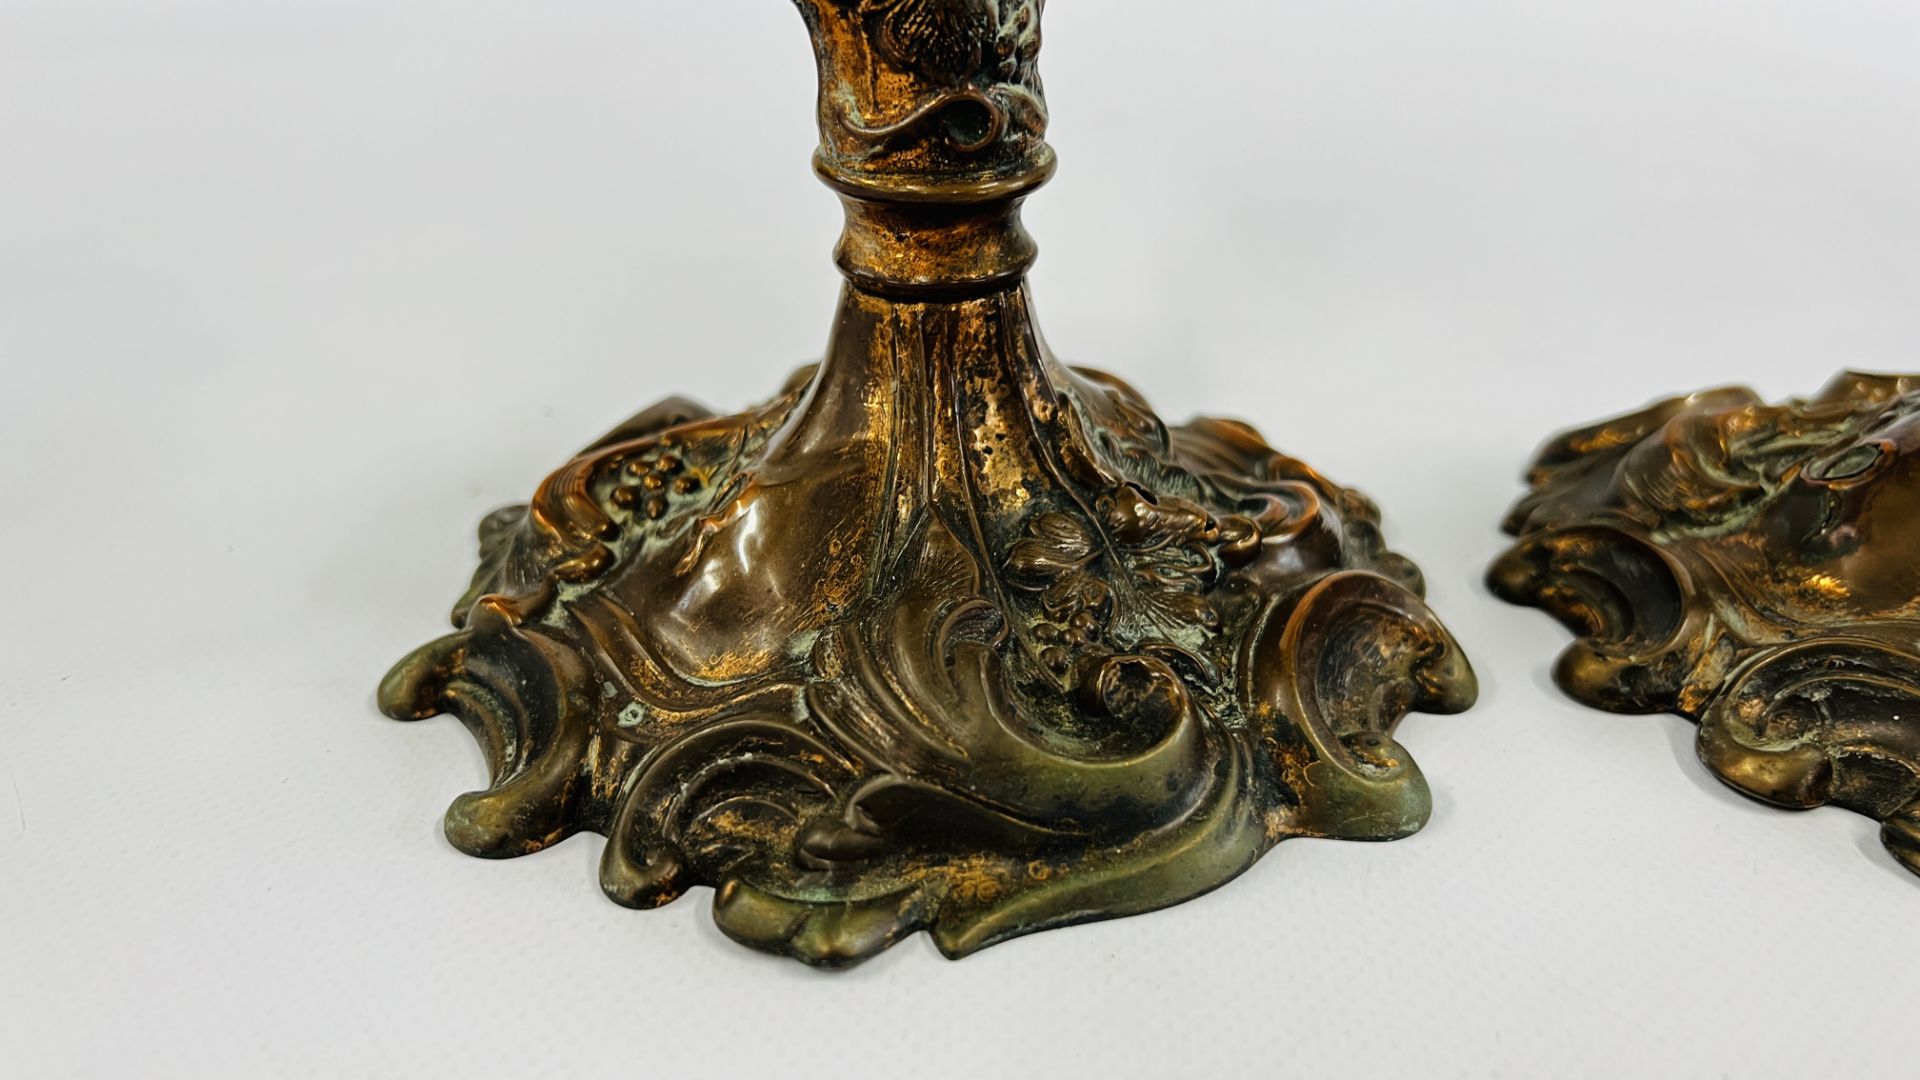 A PAIR OF ORNATE C19TH COPPER CANDLESTICKS WITH DETACHABLE SCONCES - HEIGHT 27CM. - Image 6 of 20